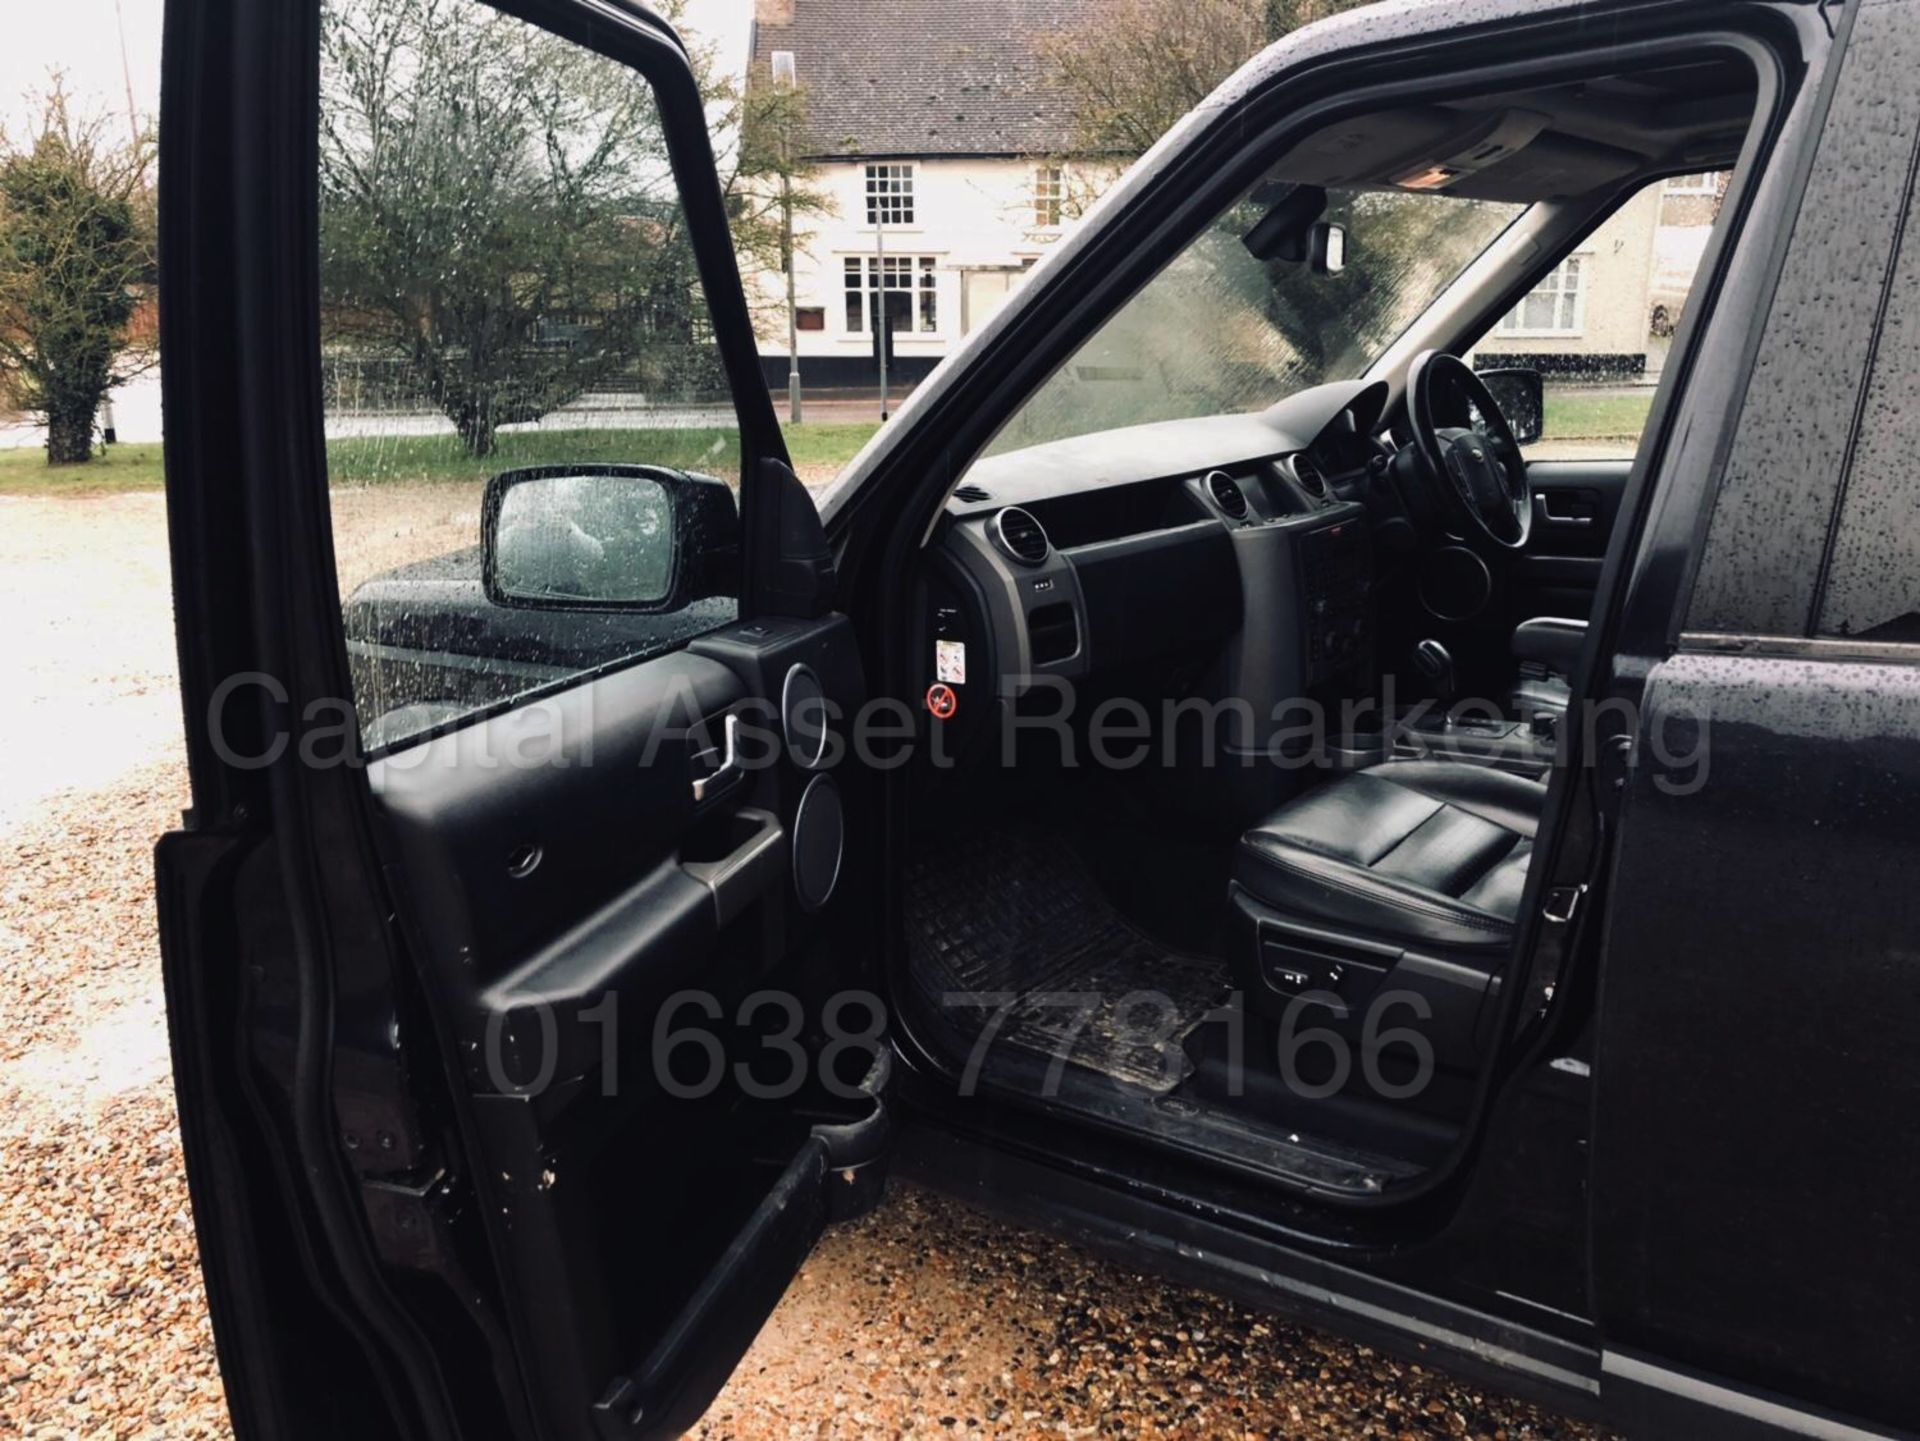 (On Sale) LAND ROVER DISCOVERY 3 'HSE' (2007 MODEL) 'TDV6 - AUTO - LEATHER - SAT NAV' *HUGE SPEC* - Image 20 of 51